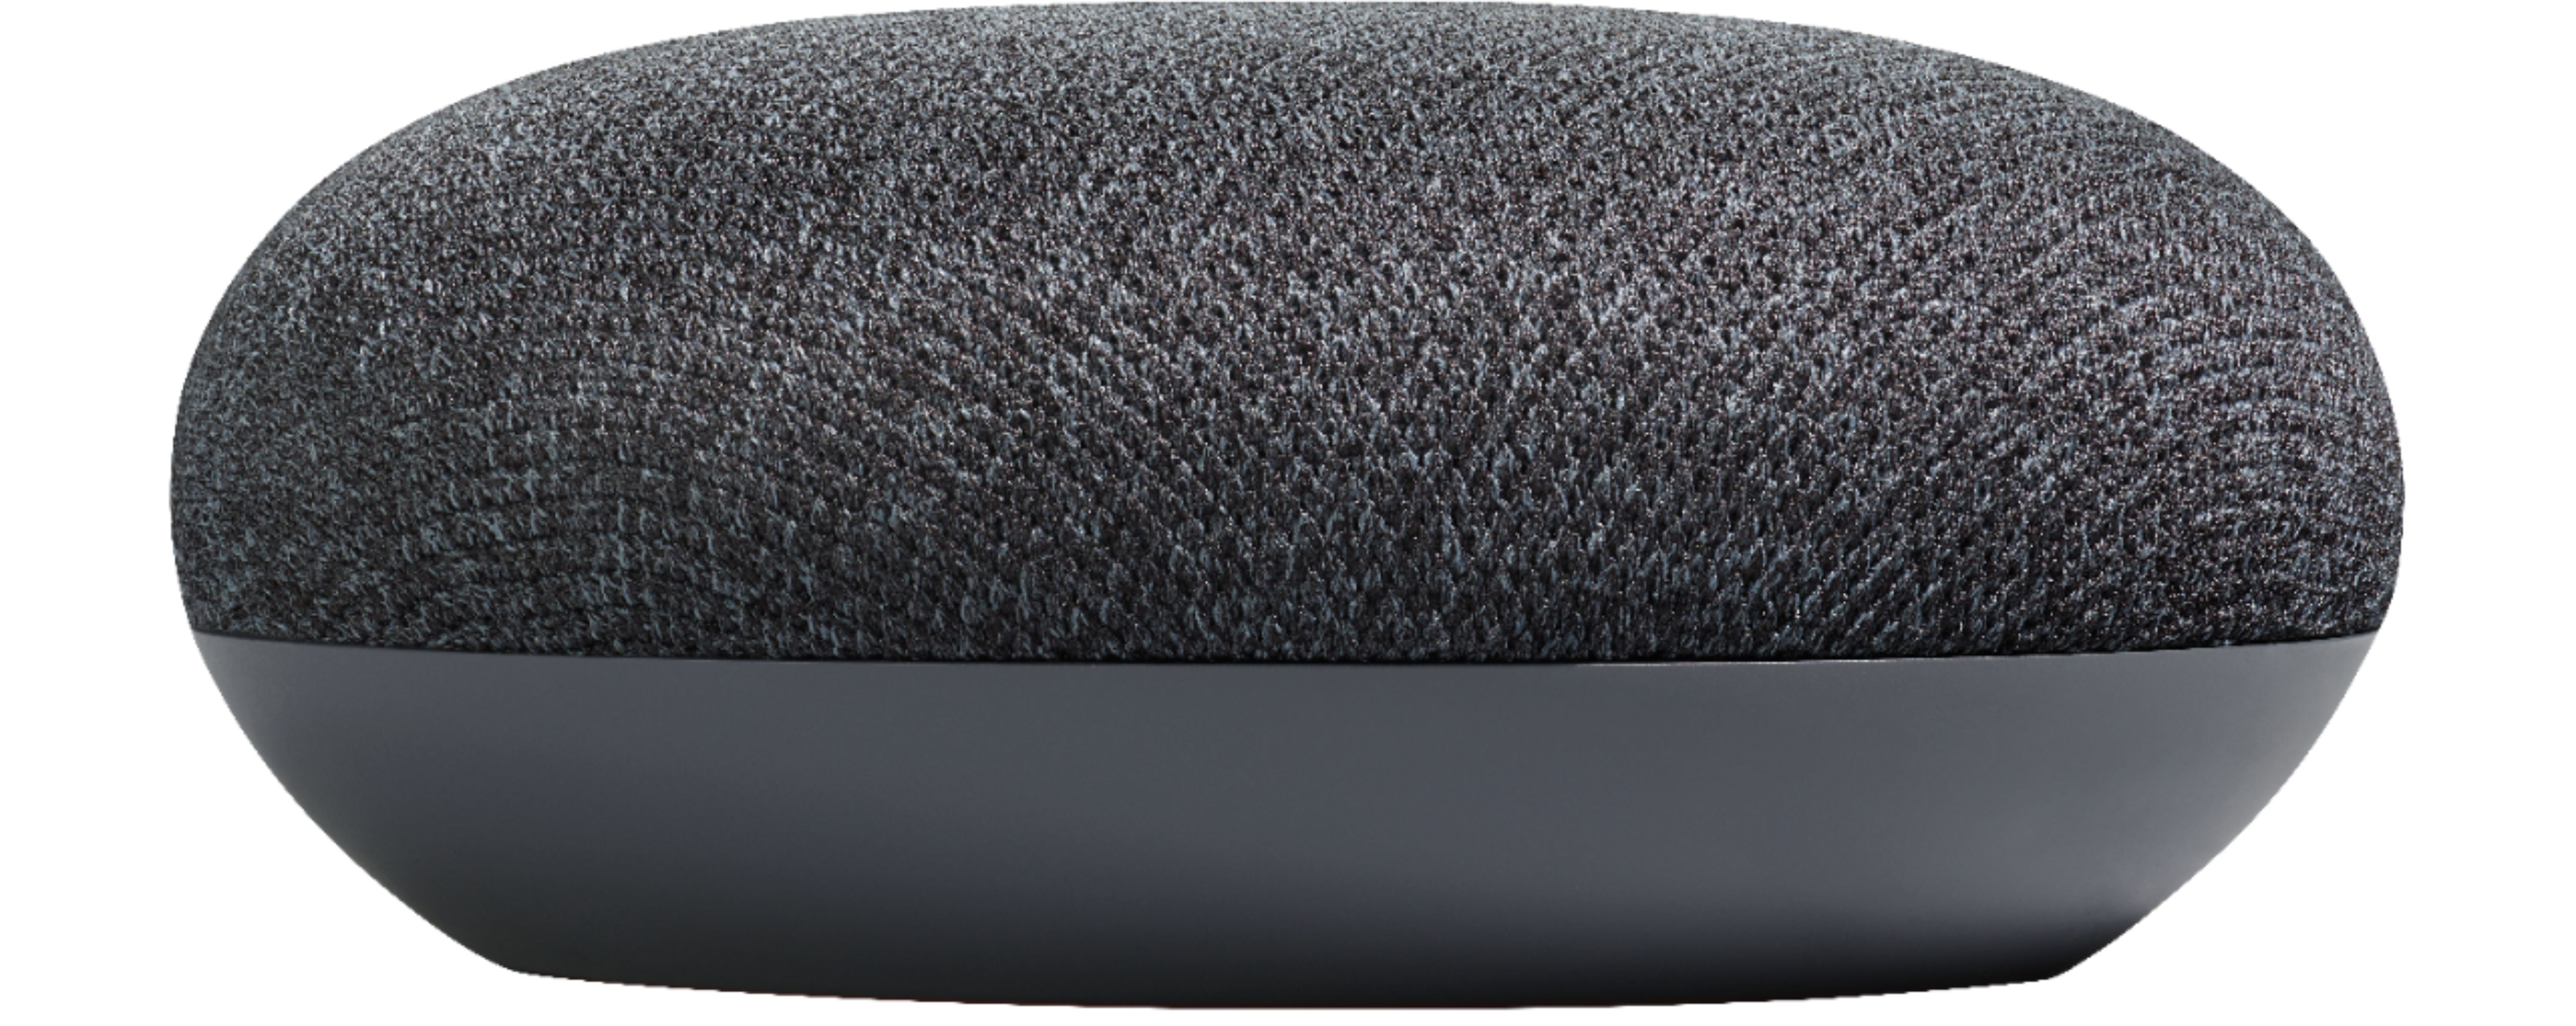 Home Mini (1st Generation) - Smart Speaker with Google Assistant - Charcoal